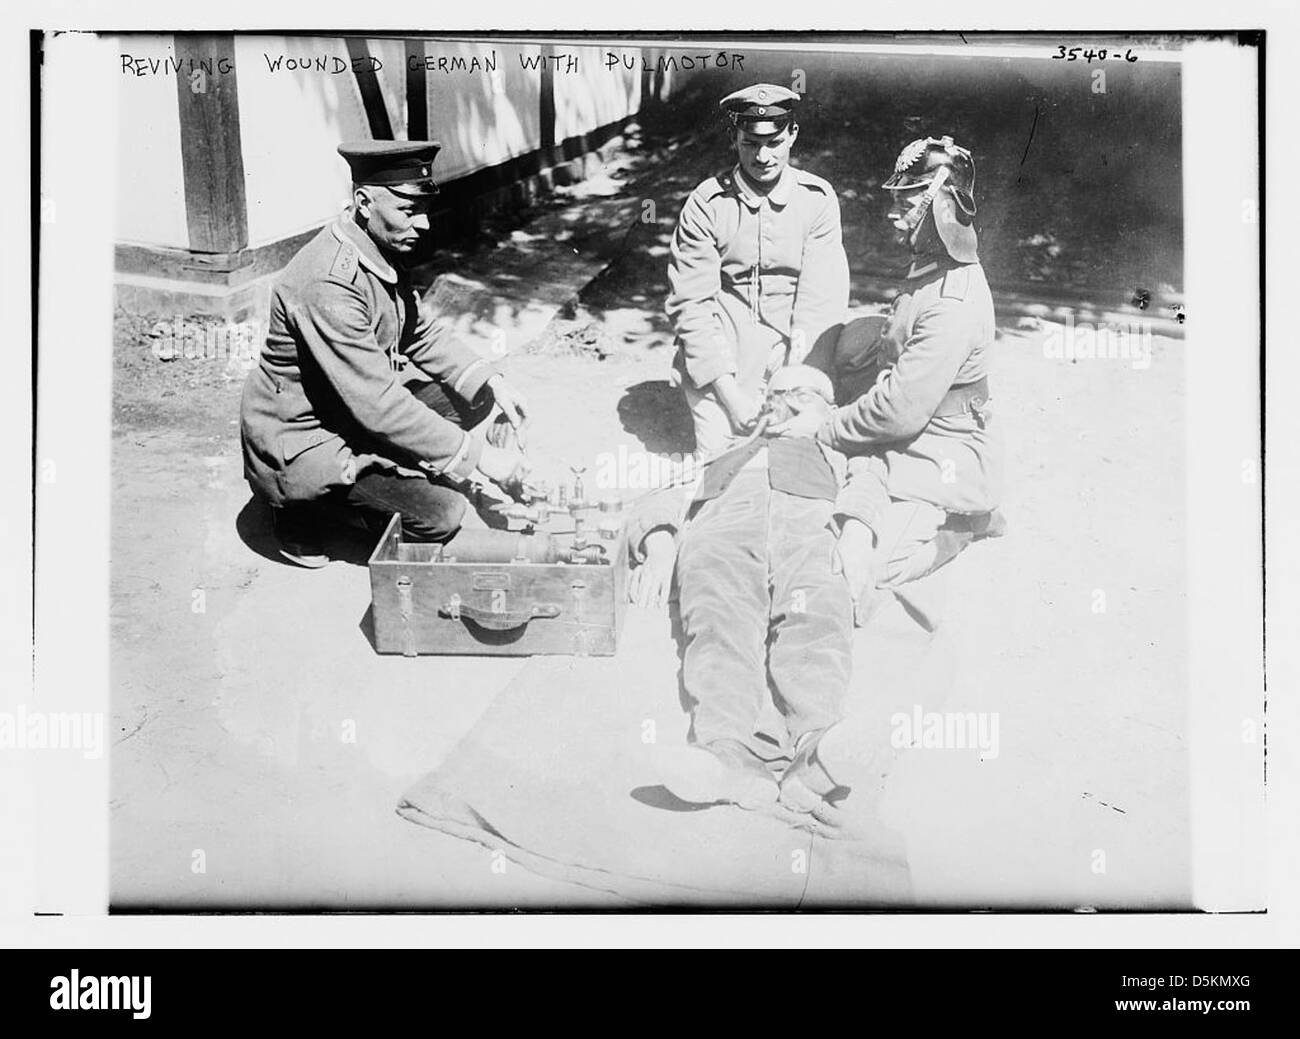 Reviving wounded German with Pulmotor (LOC) Stock Photo